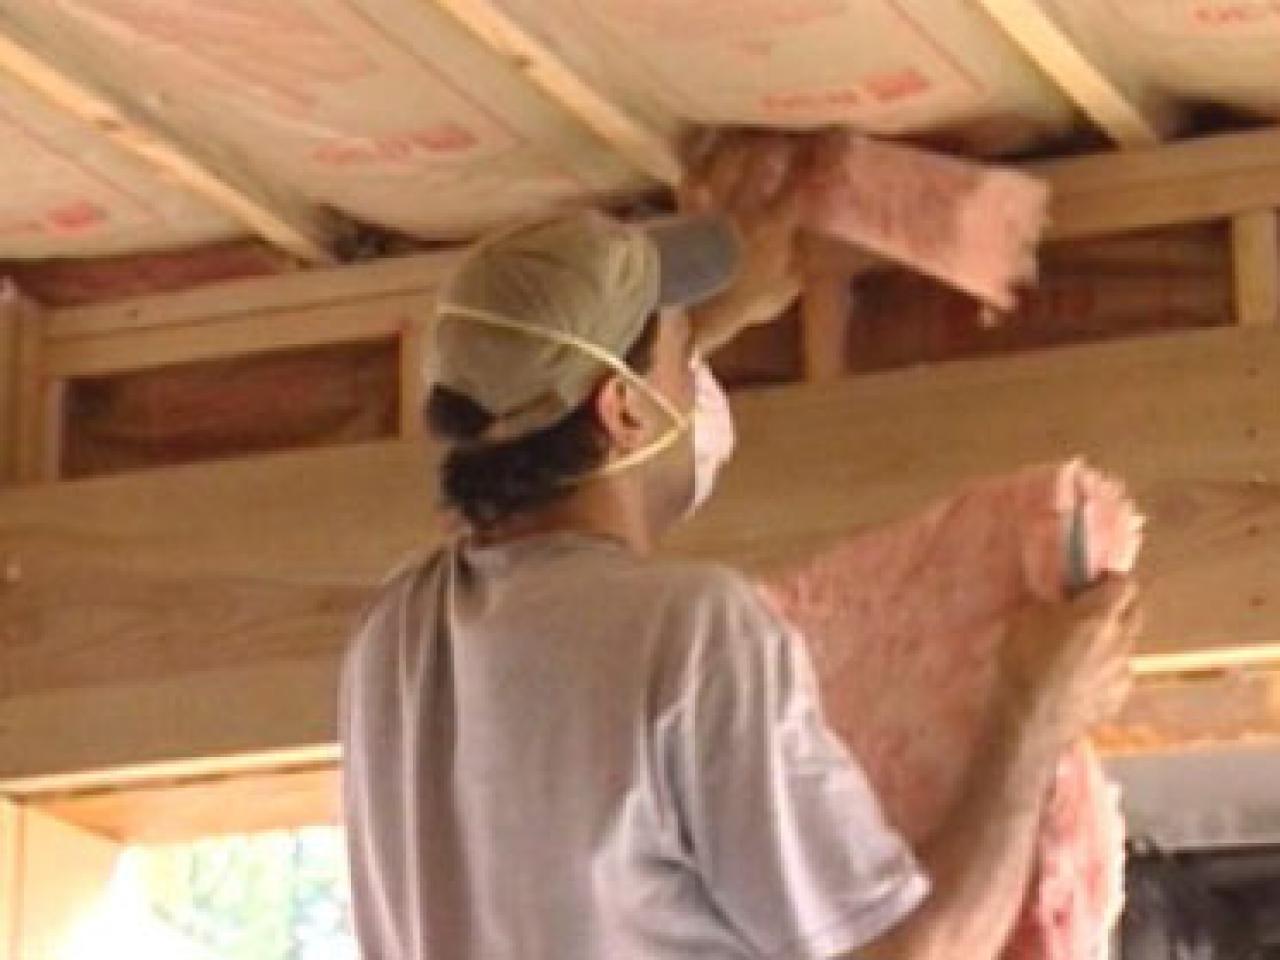 What You Should Know About Installing Insulation | DIY